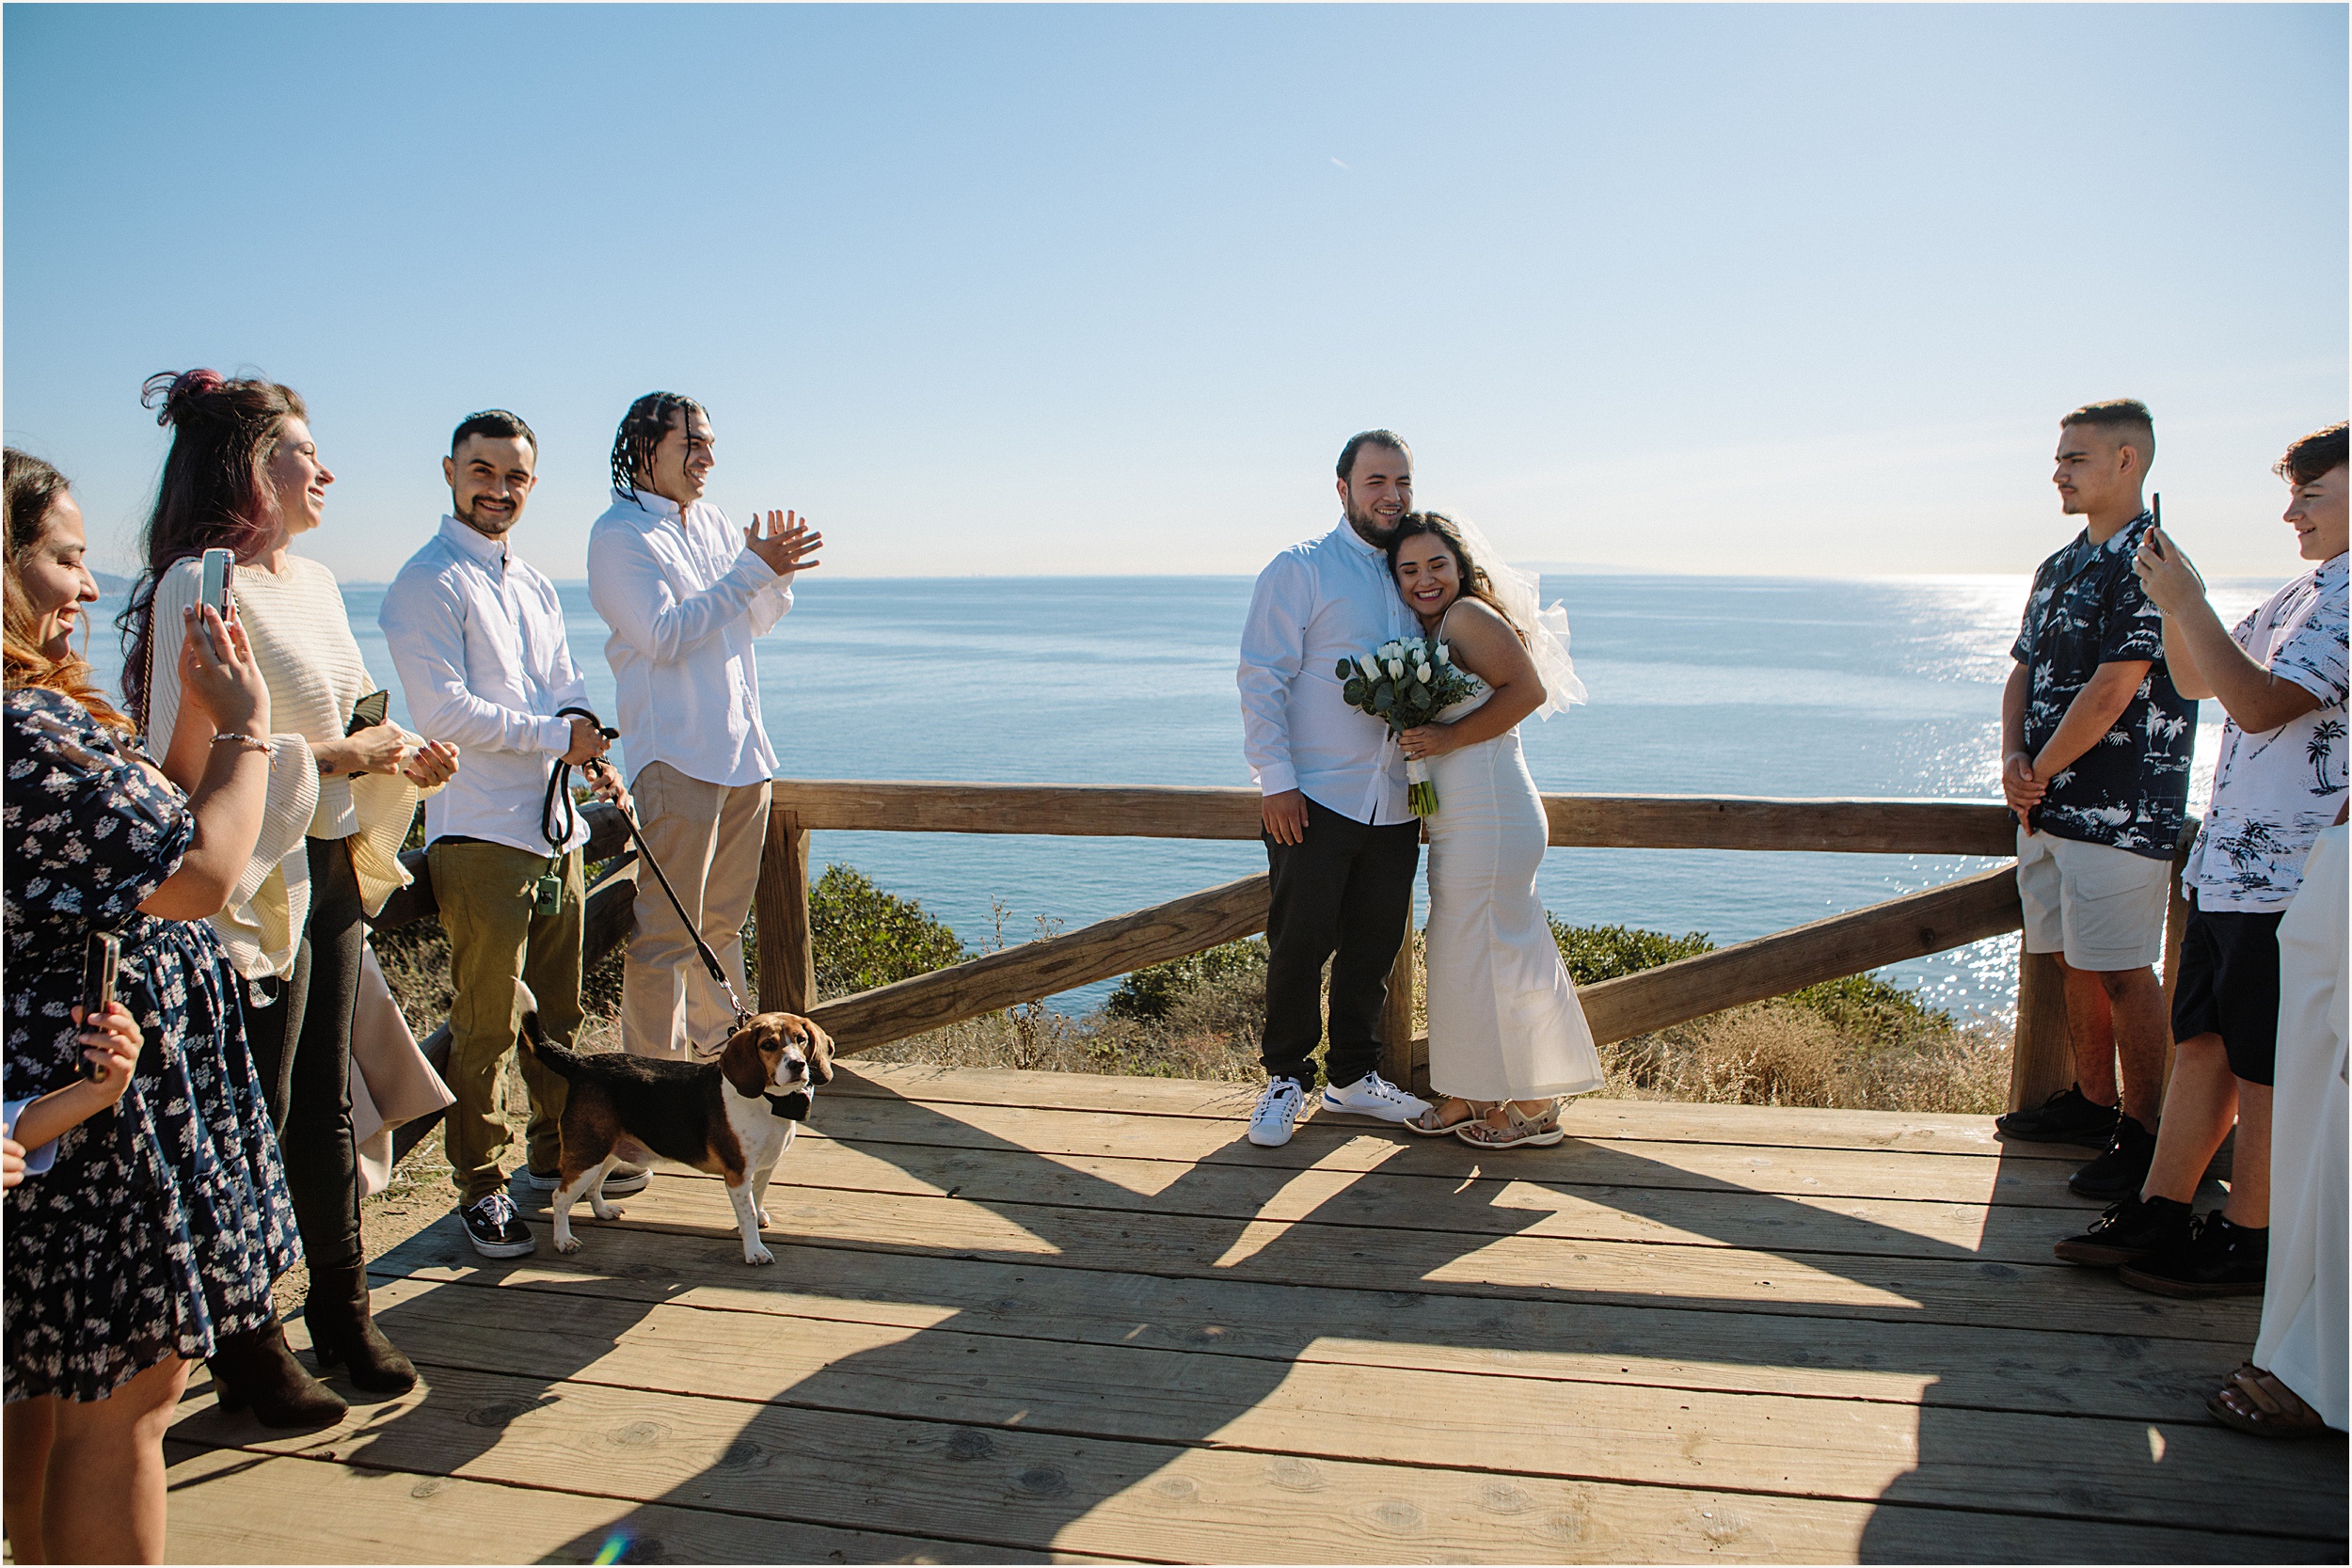 Andrea-and-Anthony-31 Intimate Elopement at Zuma Beach in Malibu, CA | Andrea & Anthony￼